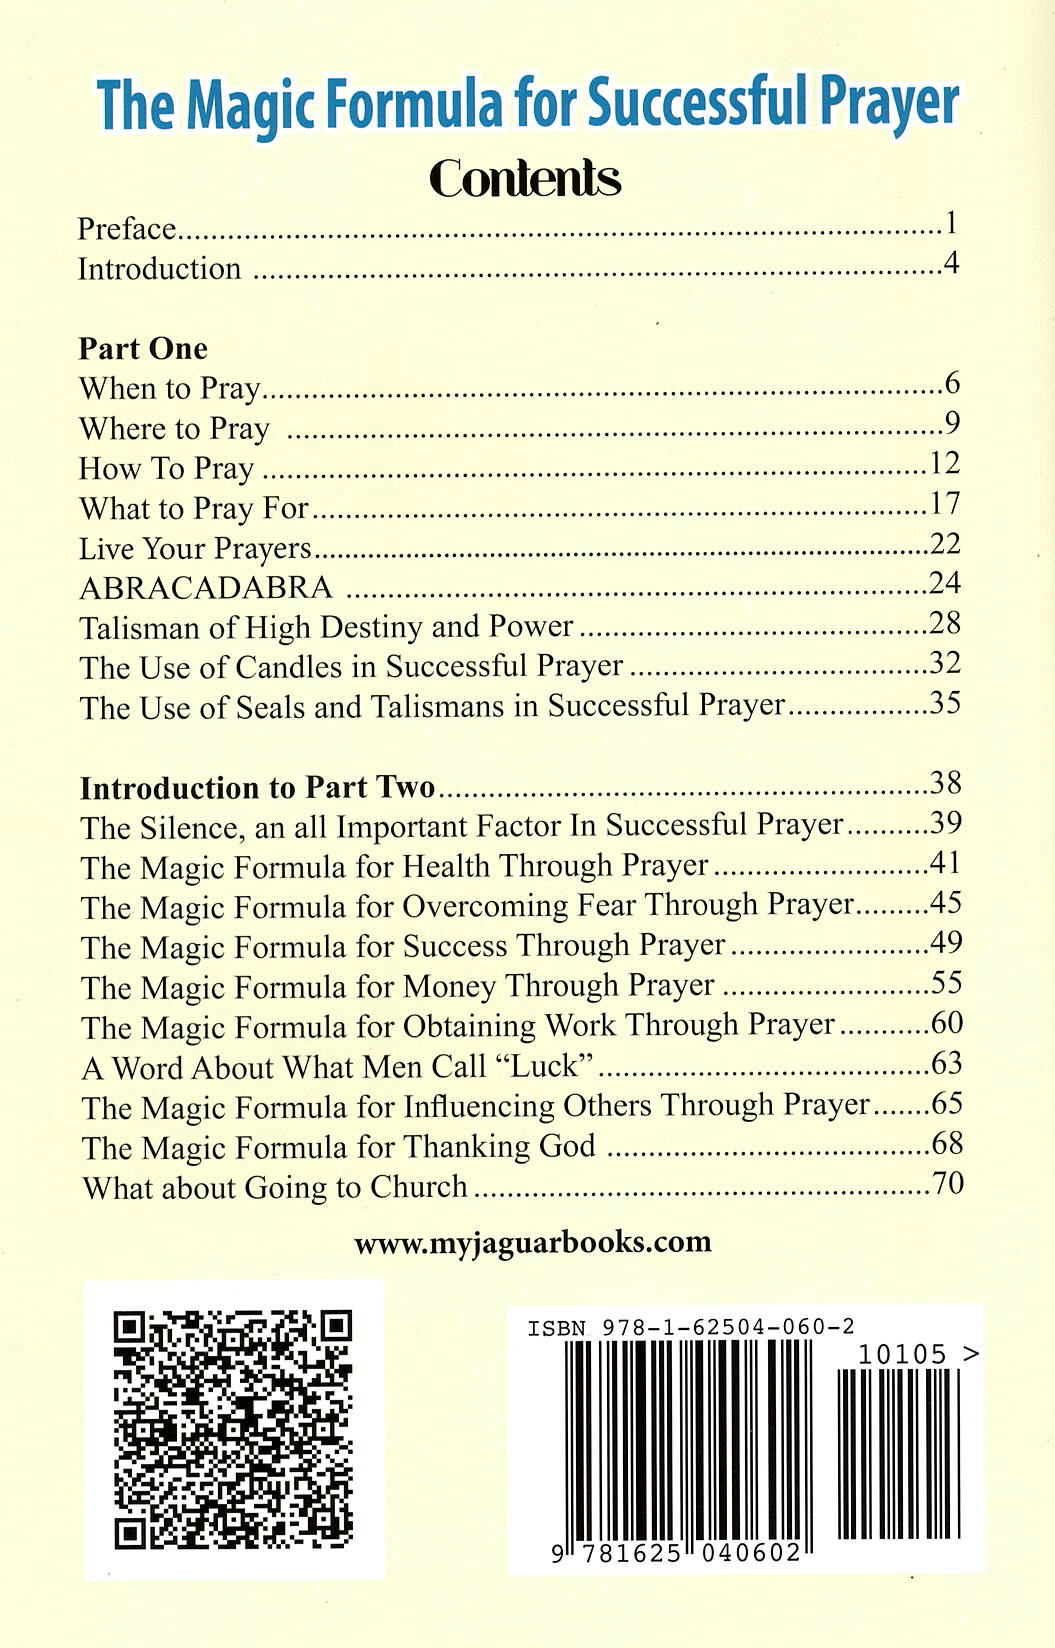 The Magic Formula for Successful Prayer, by Mikhail Strabo